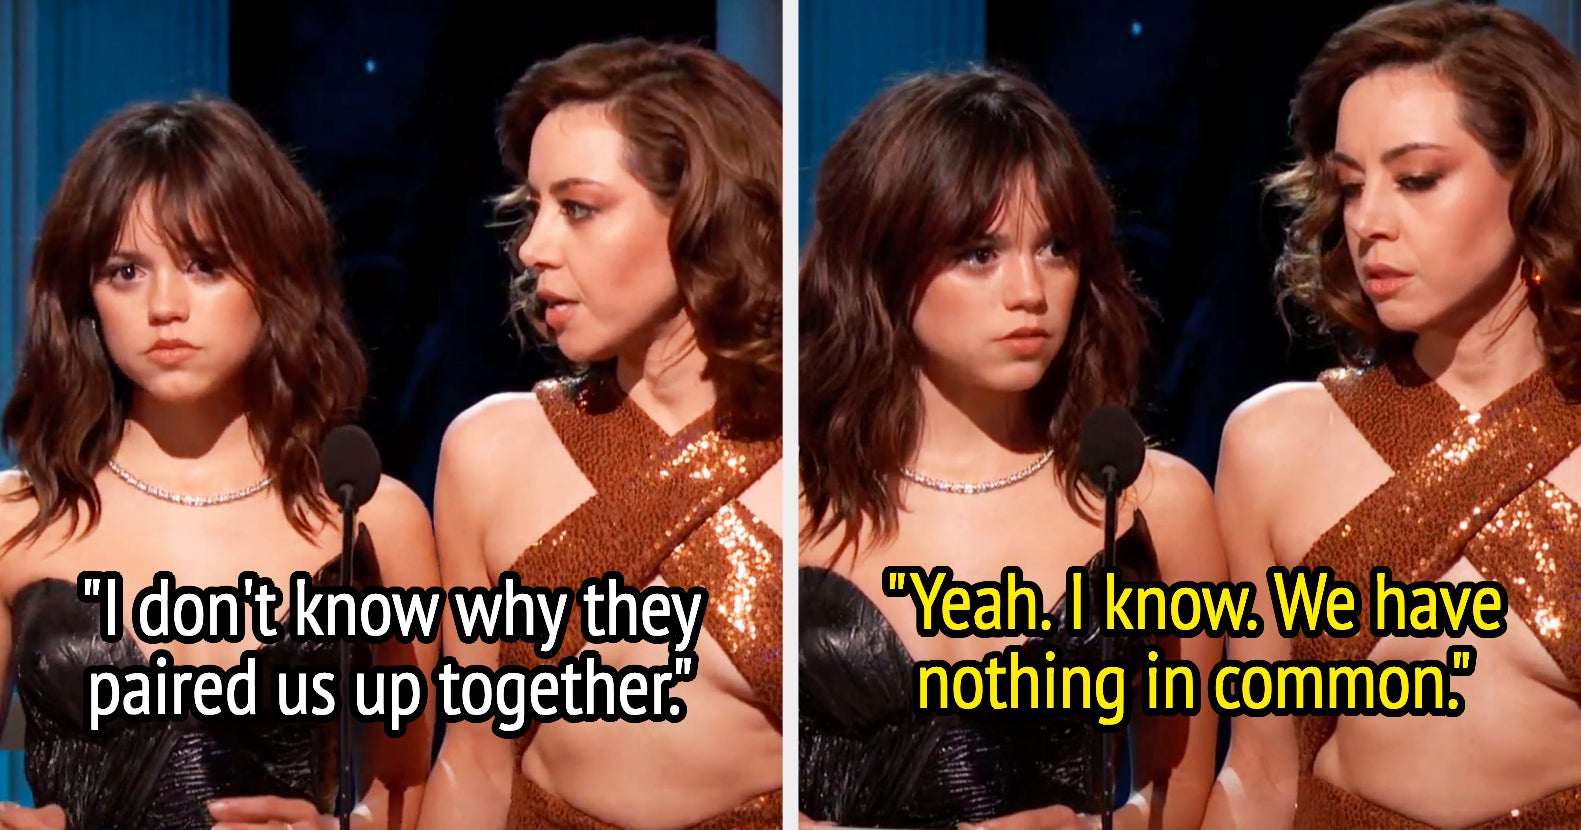 Jenna Ortega and Aubrey Plaza had the audience howling over their pair